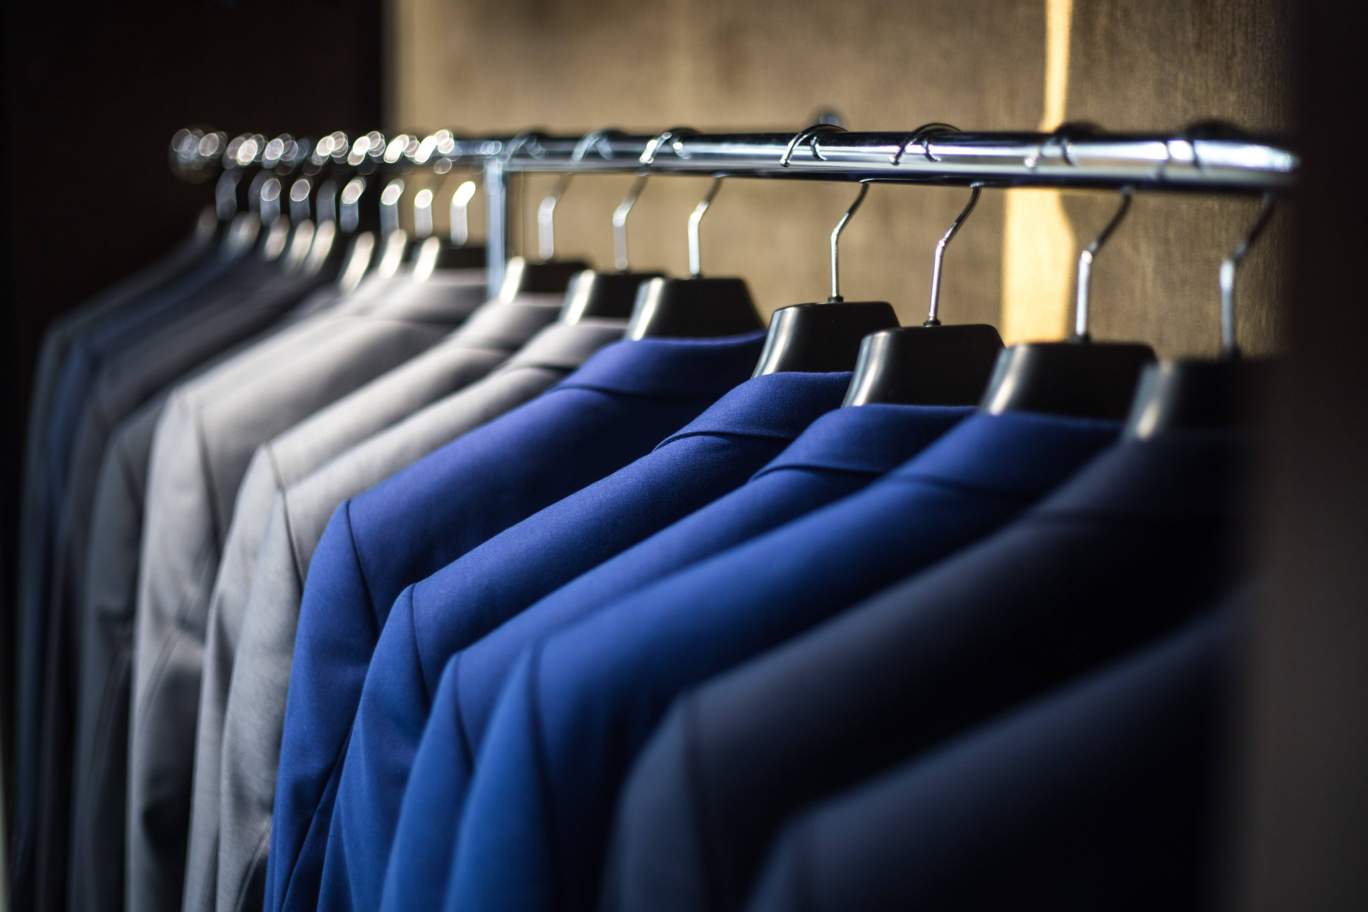 gray, blue and black suit jackets hanging on a clothes rack